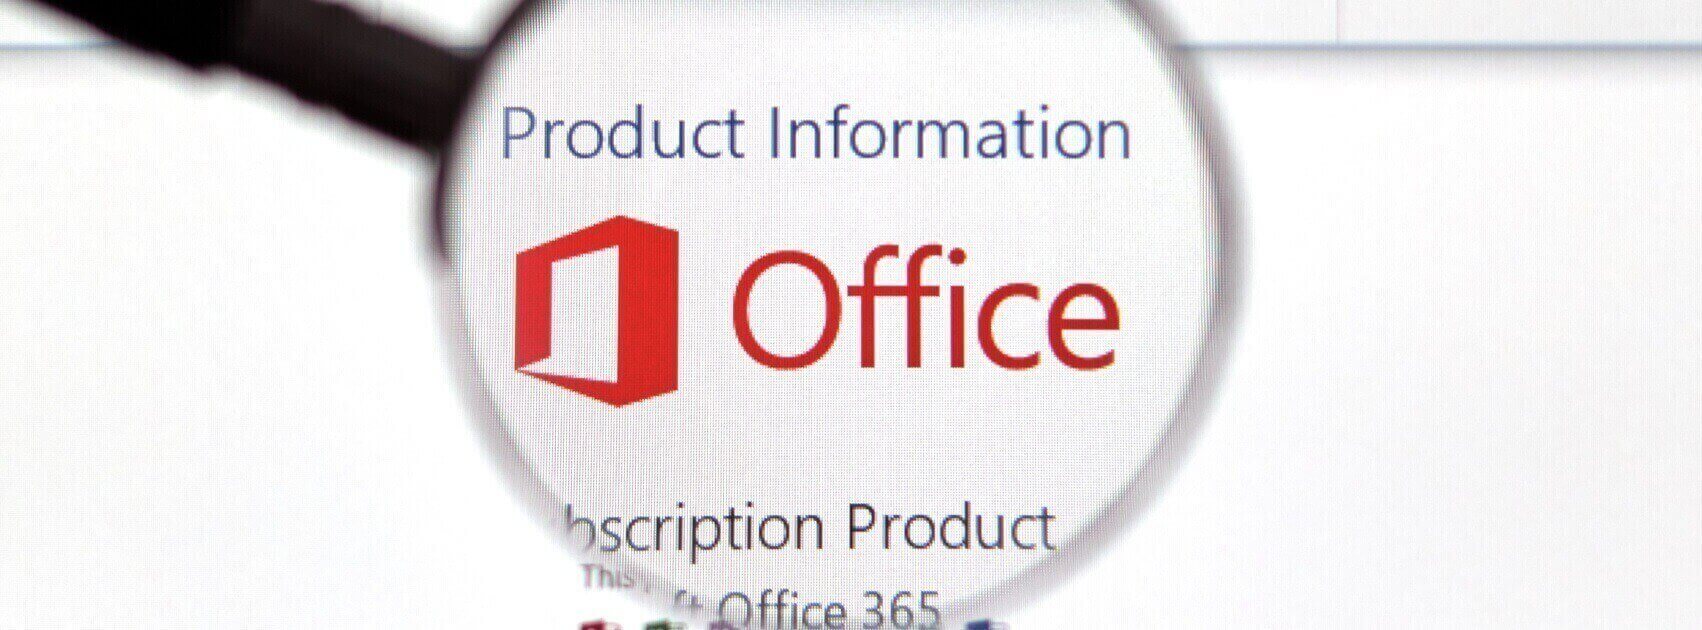 Your Office: Microsoft Office 365, Excel 2019 Comprehensive